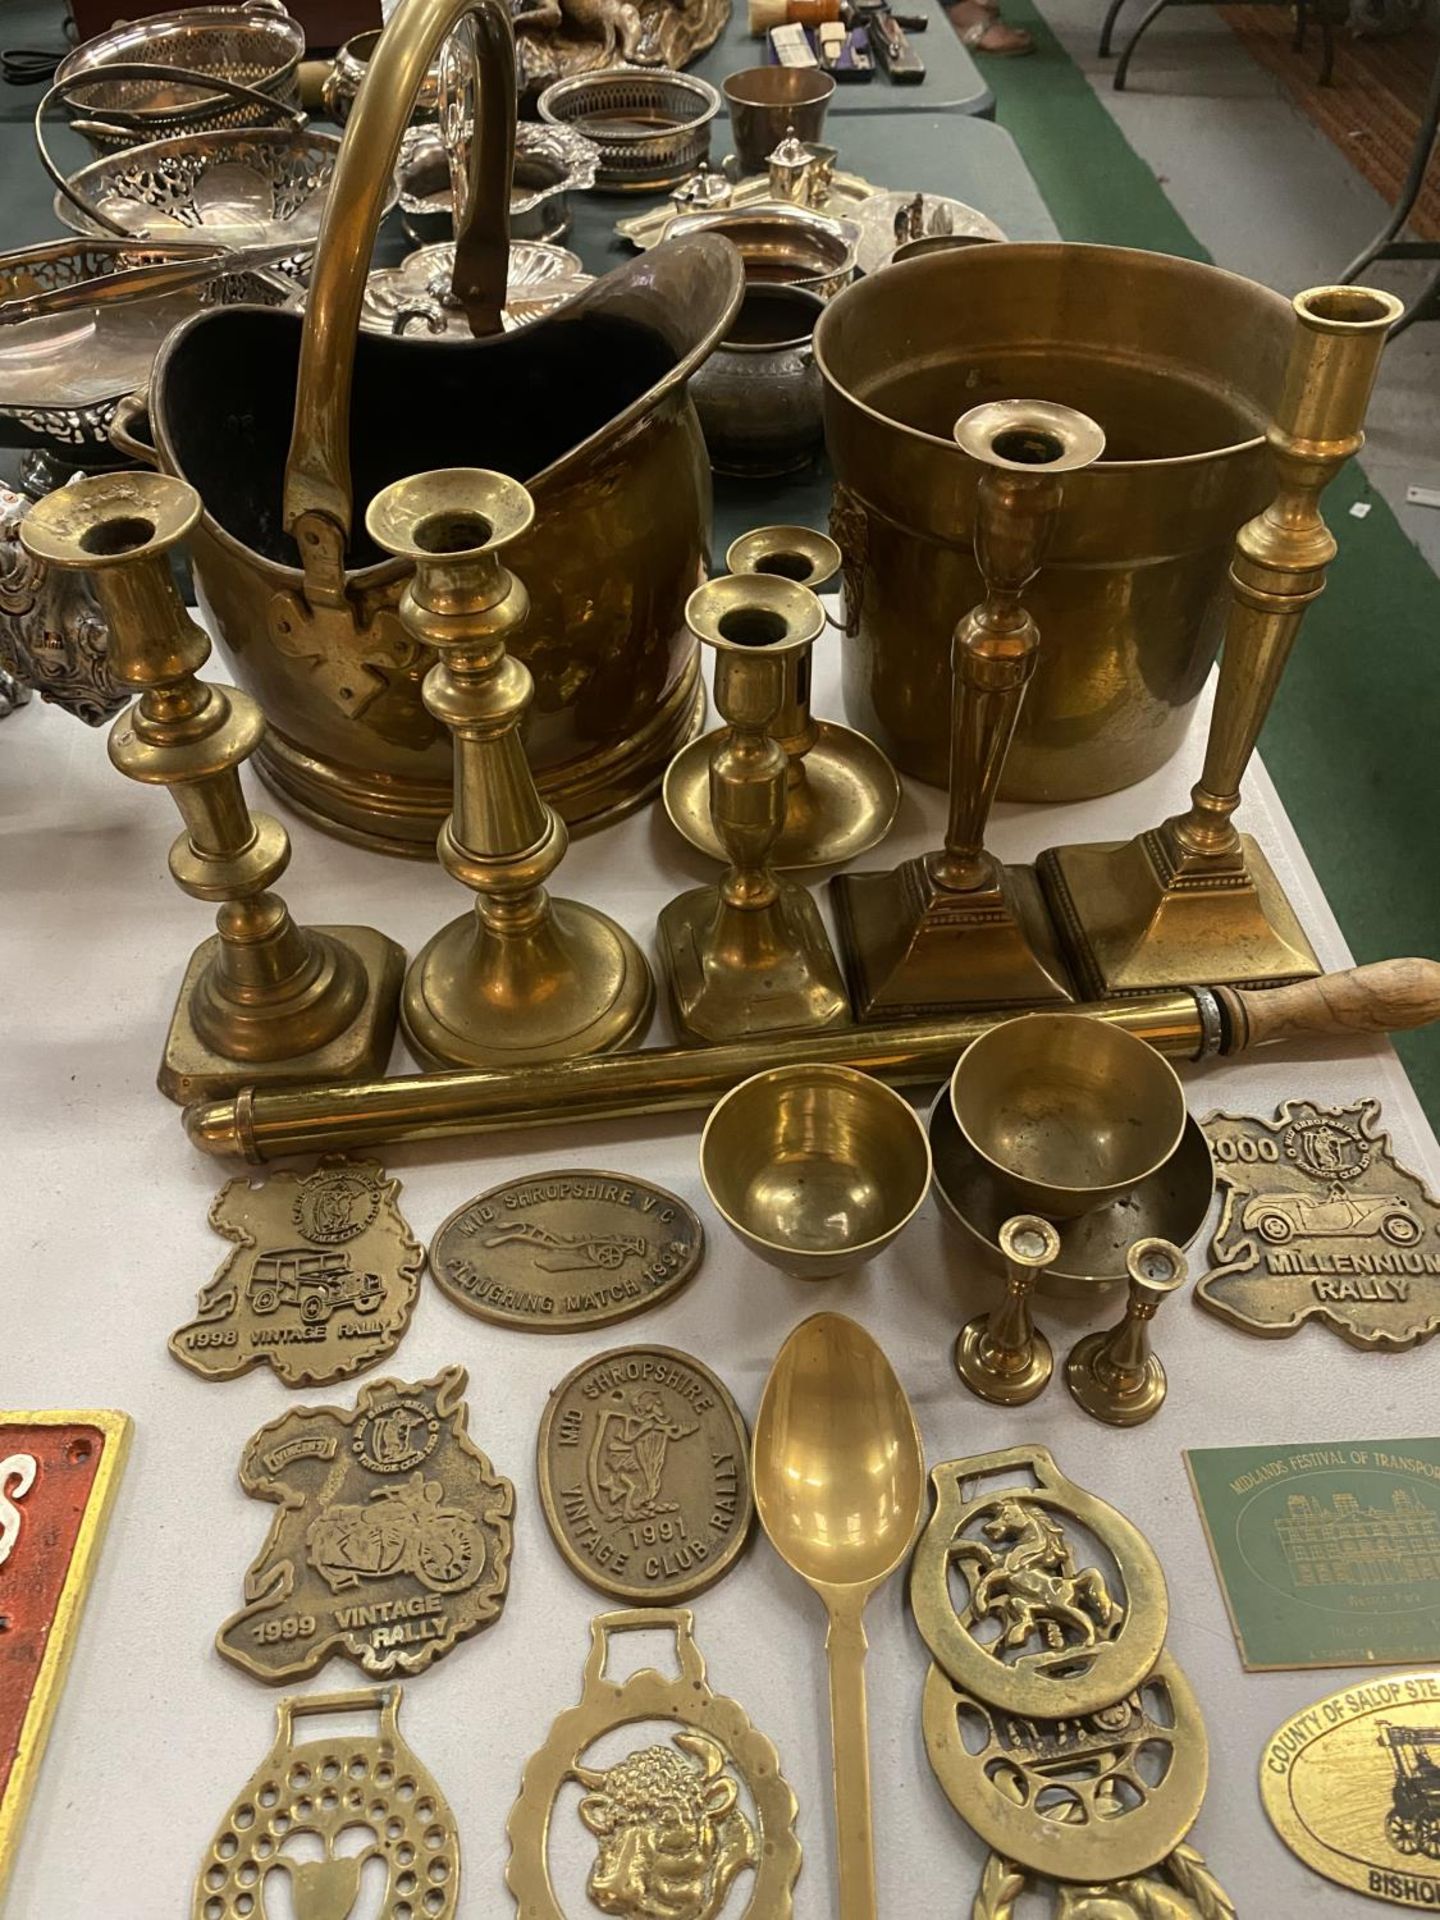 A COLLECTION OF BRASS WARE TO INCLUDE COAL SCUTTLE, CANDLESTICKS, HORSE BRASSES, RALLY PLAQUES ETC - Image 2 of 4